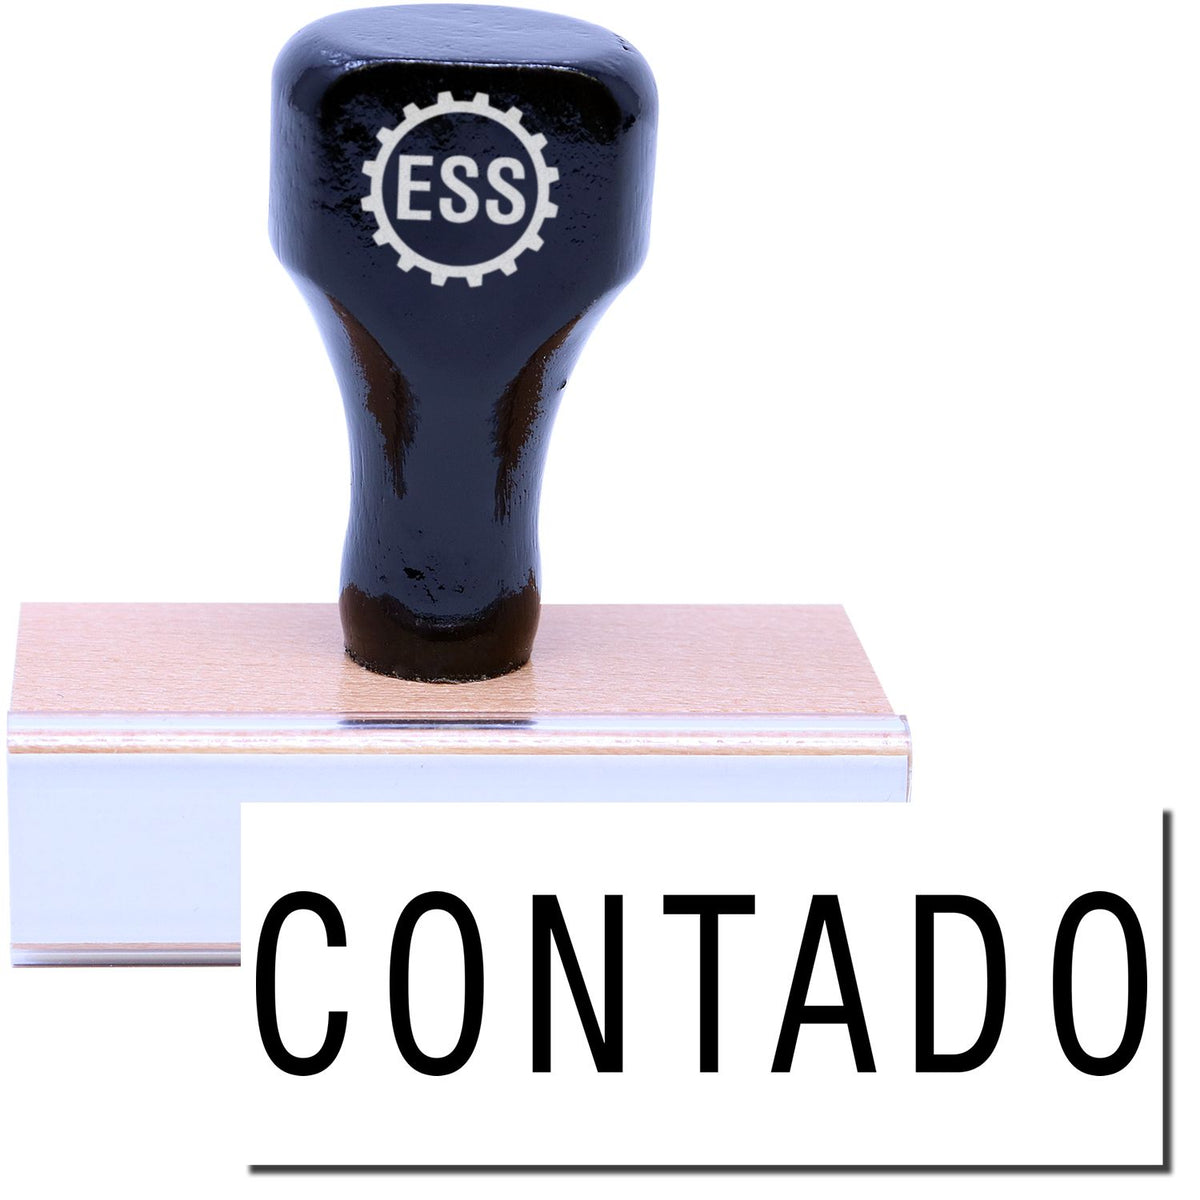 A stock office rubber stamp with a stamped image showing how the text &quot;CONTADO&quot; in a large font is displayed after stamping.